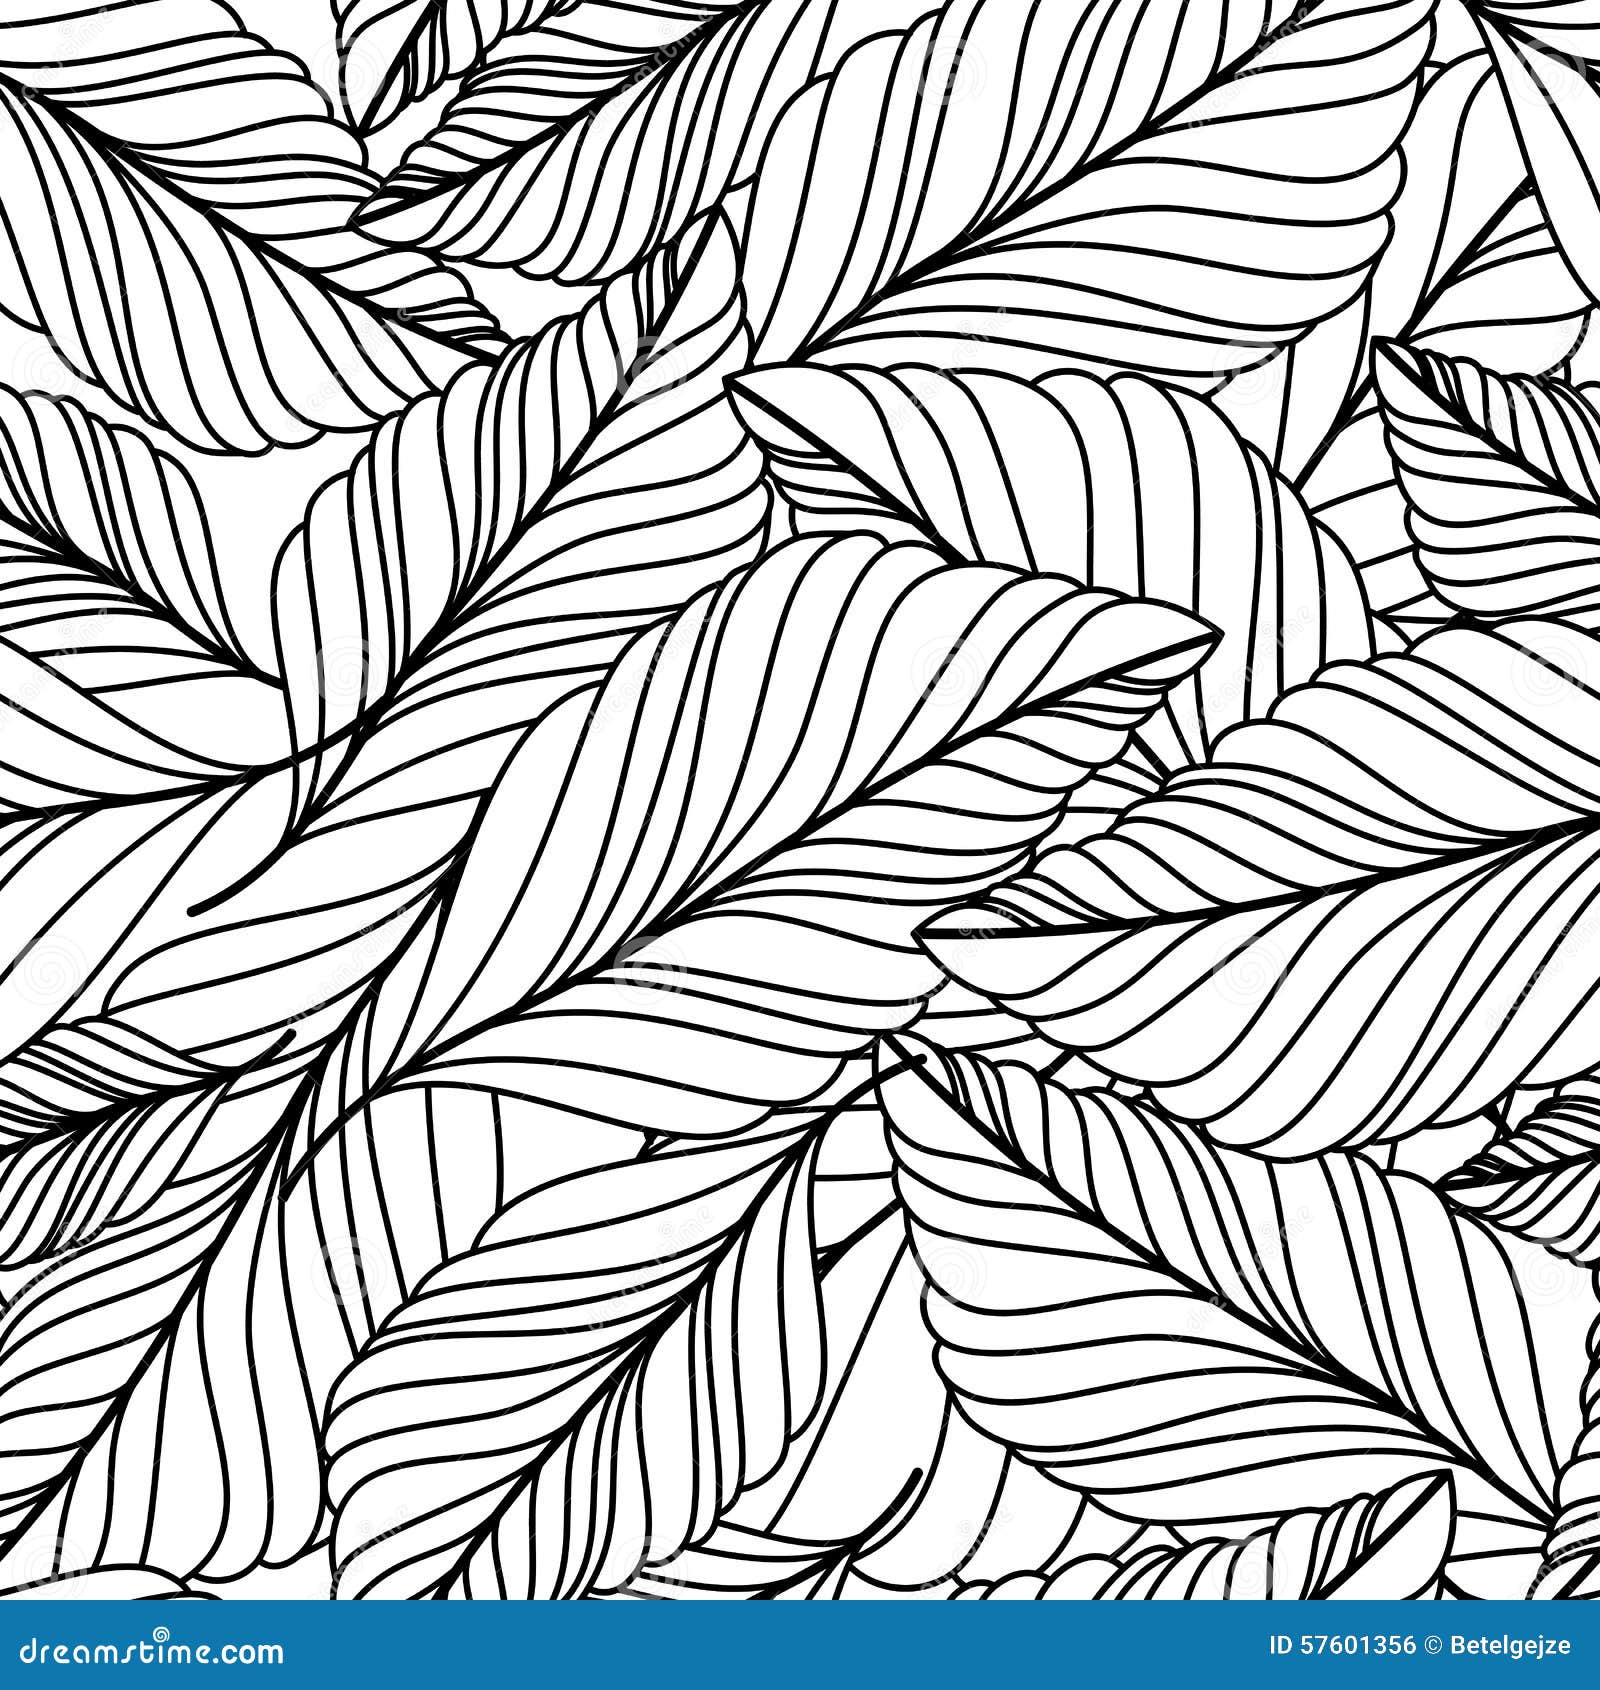  hand drawn doodle leaves seamless pattern. abstract autumn